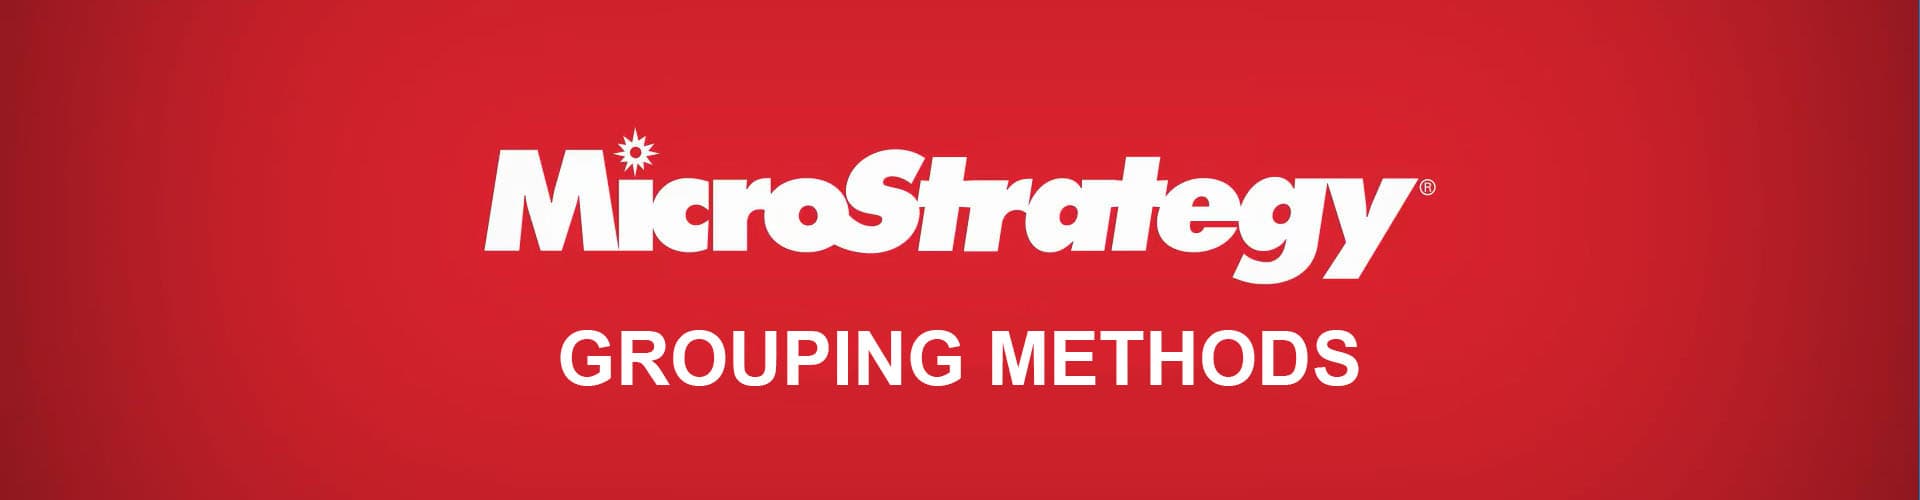 MicroStrategy Grouping Methods